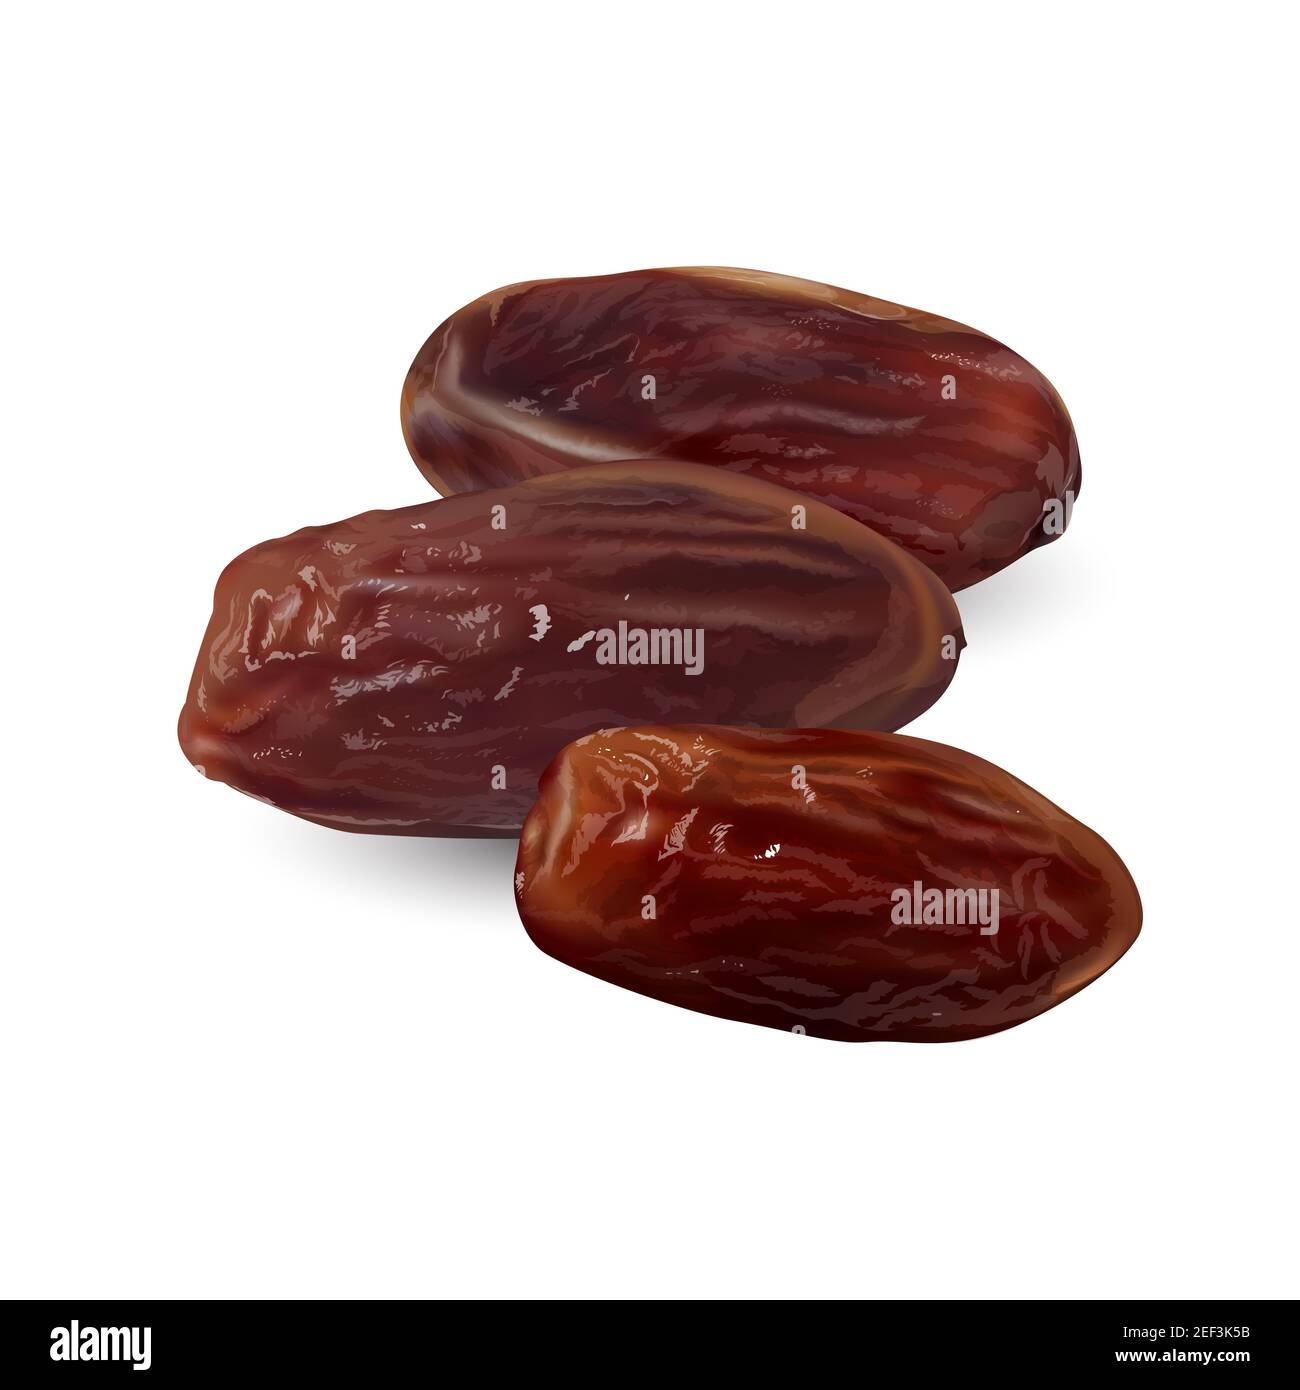 Three dried dates on a white plate. Stock Photo